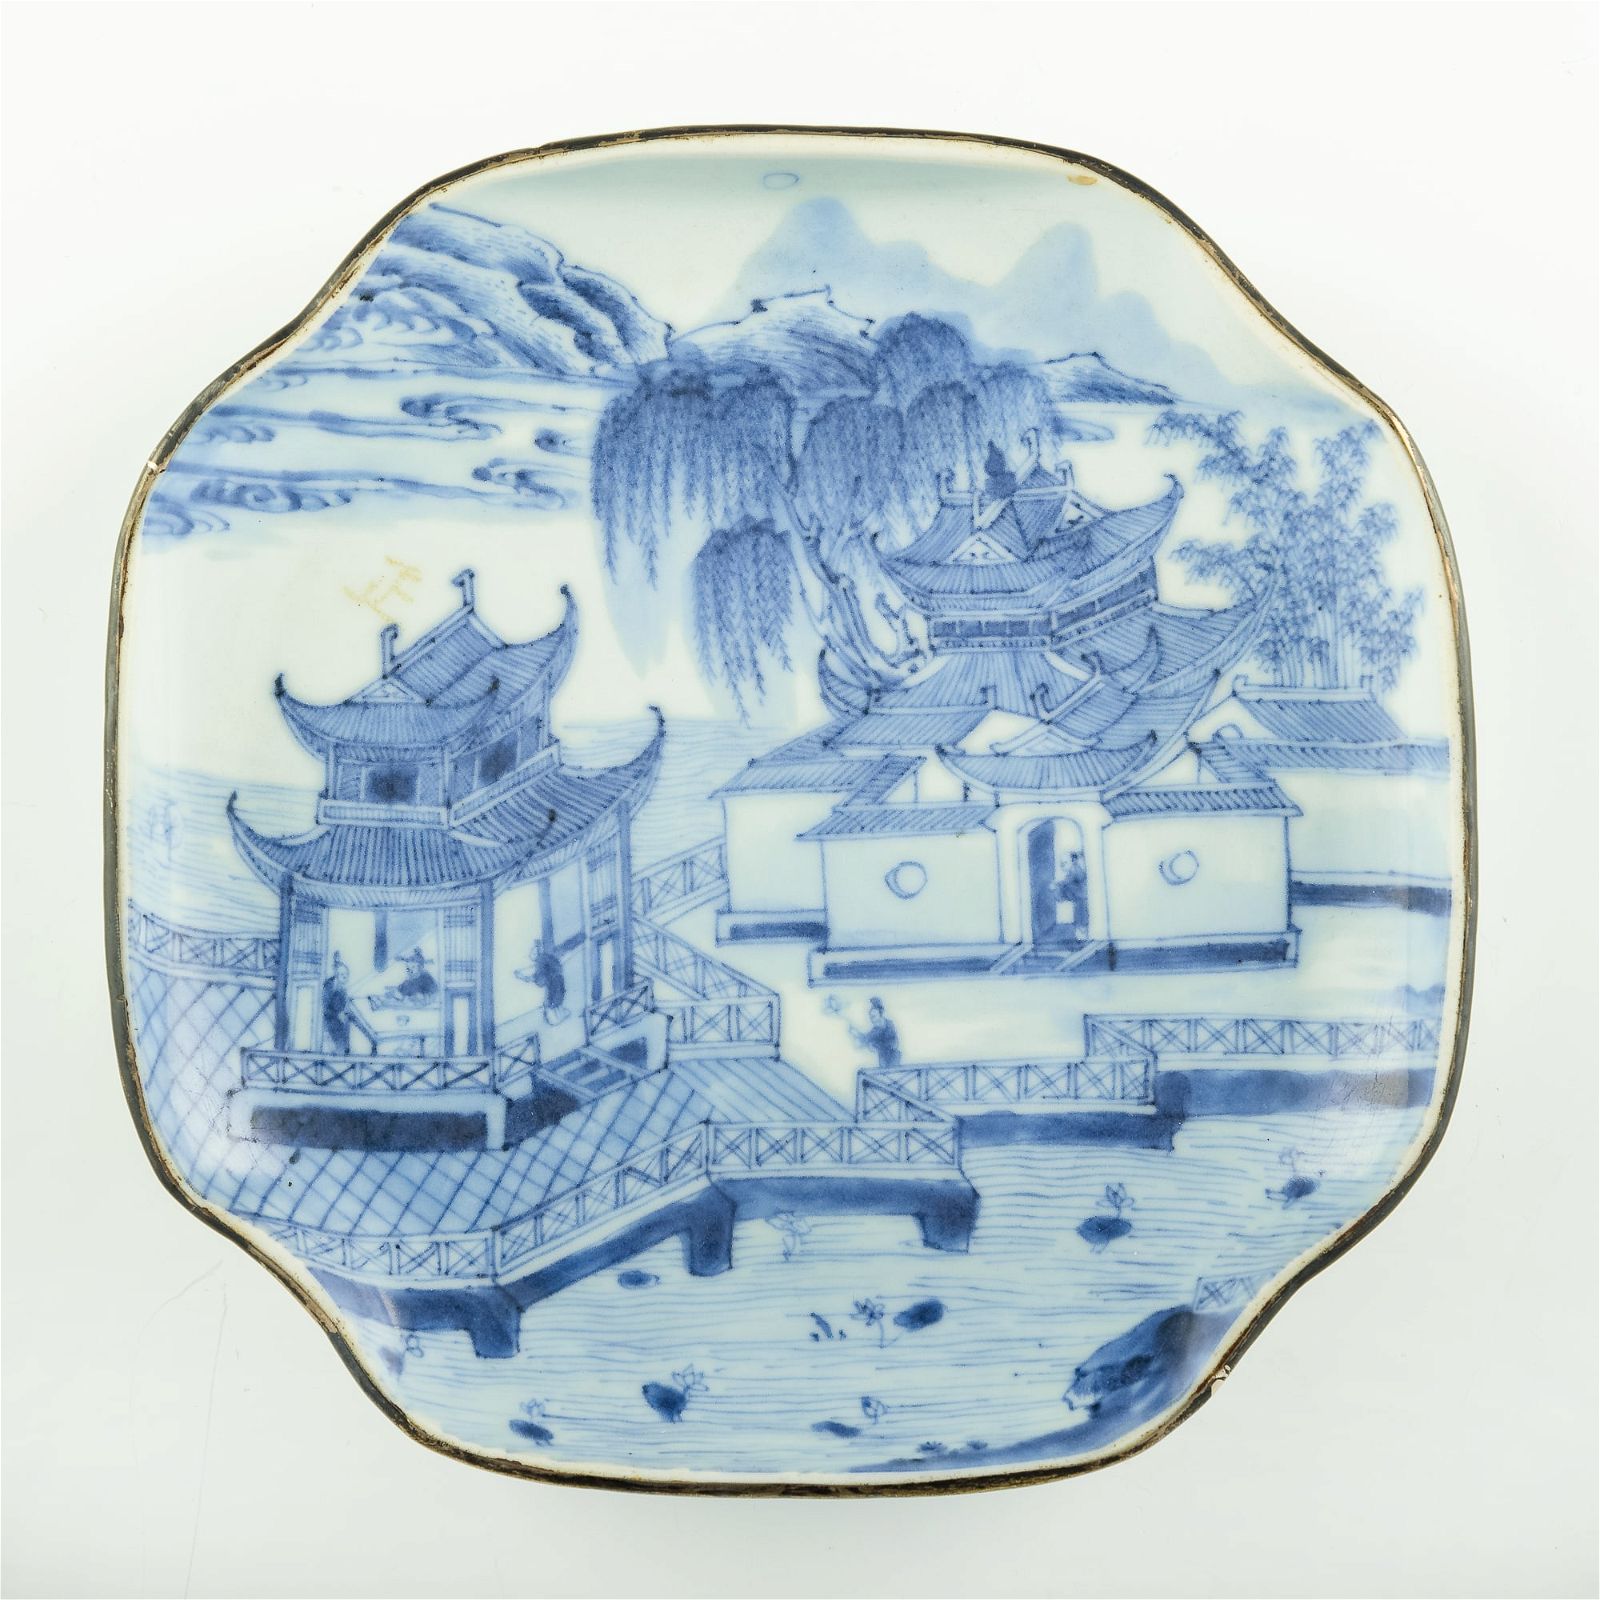 Chinese bleu de Hue dish made for the Vietnamese court, which hammered for $26,000 and sold for $33,280 with buyer’s premium at Oakridge Auction Gallery.